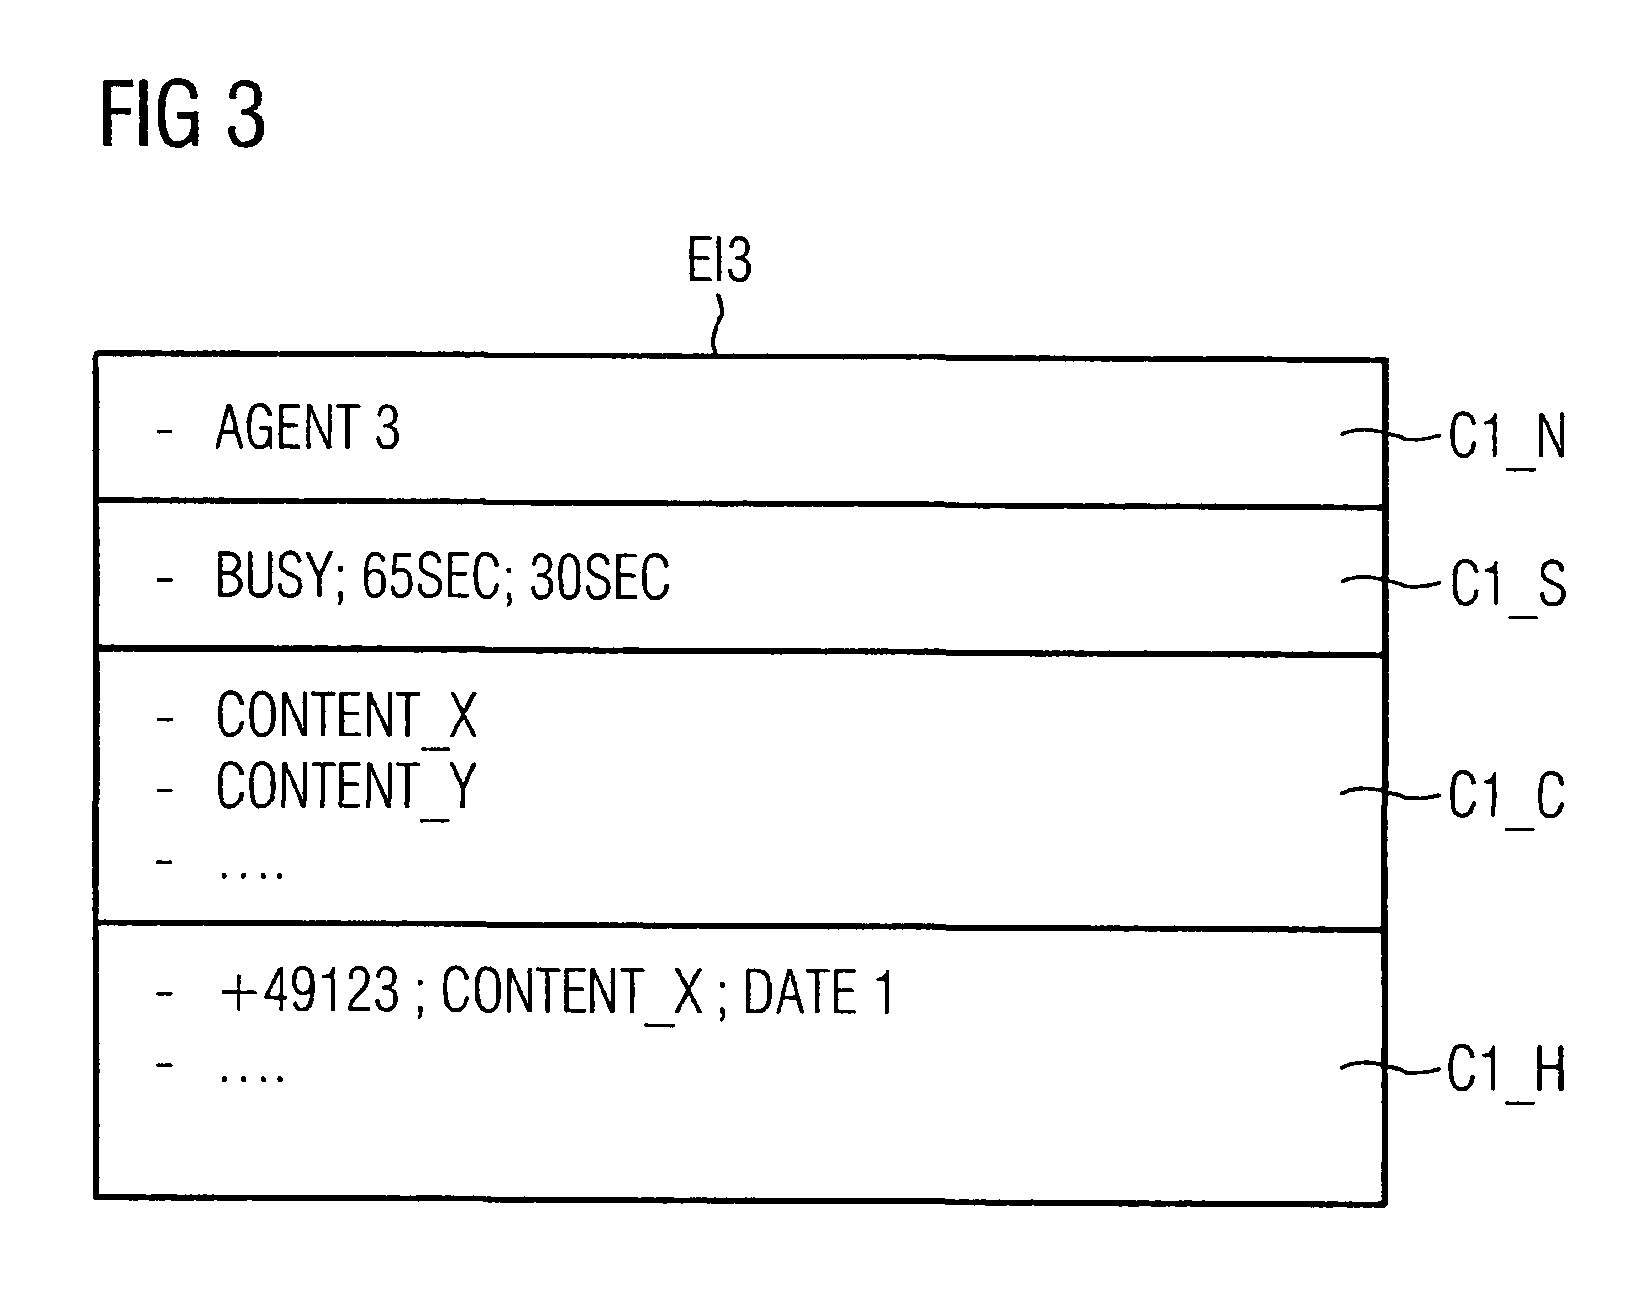 Call distribution in a direct-communication network